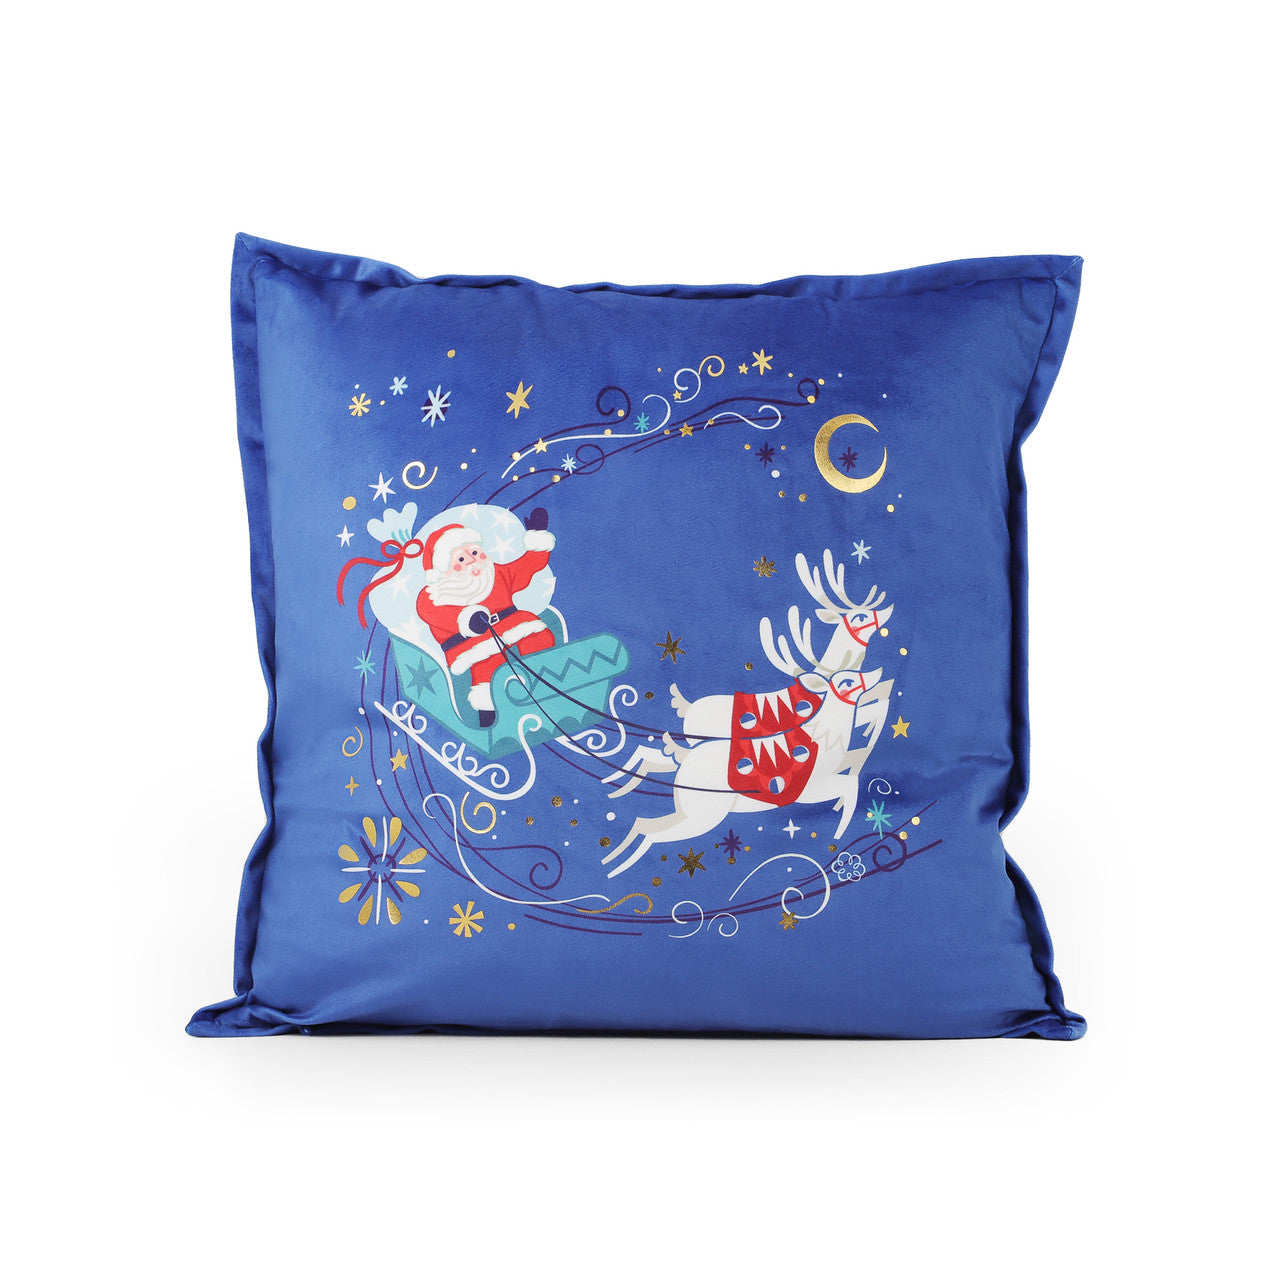 Christmas Cushion - Santa on Sleigh - NEW 2022  Gather your loved ones for a holiday celebration to remember. We just Love Christmas! The festive season, the giving of gifts, creating memories and being together with family and loved ones. Have lots of fun with our lovingly designed and created Christmas decorations, each one has a magic sparkle of elf dust!